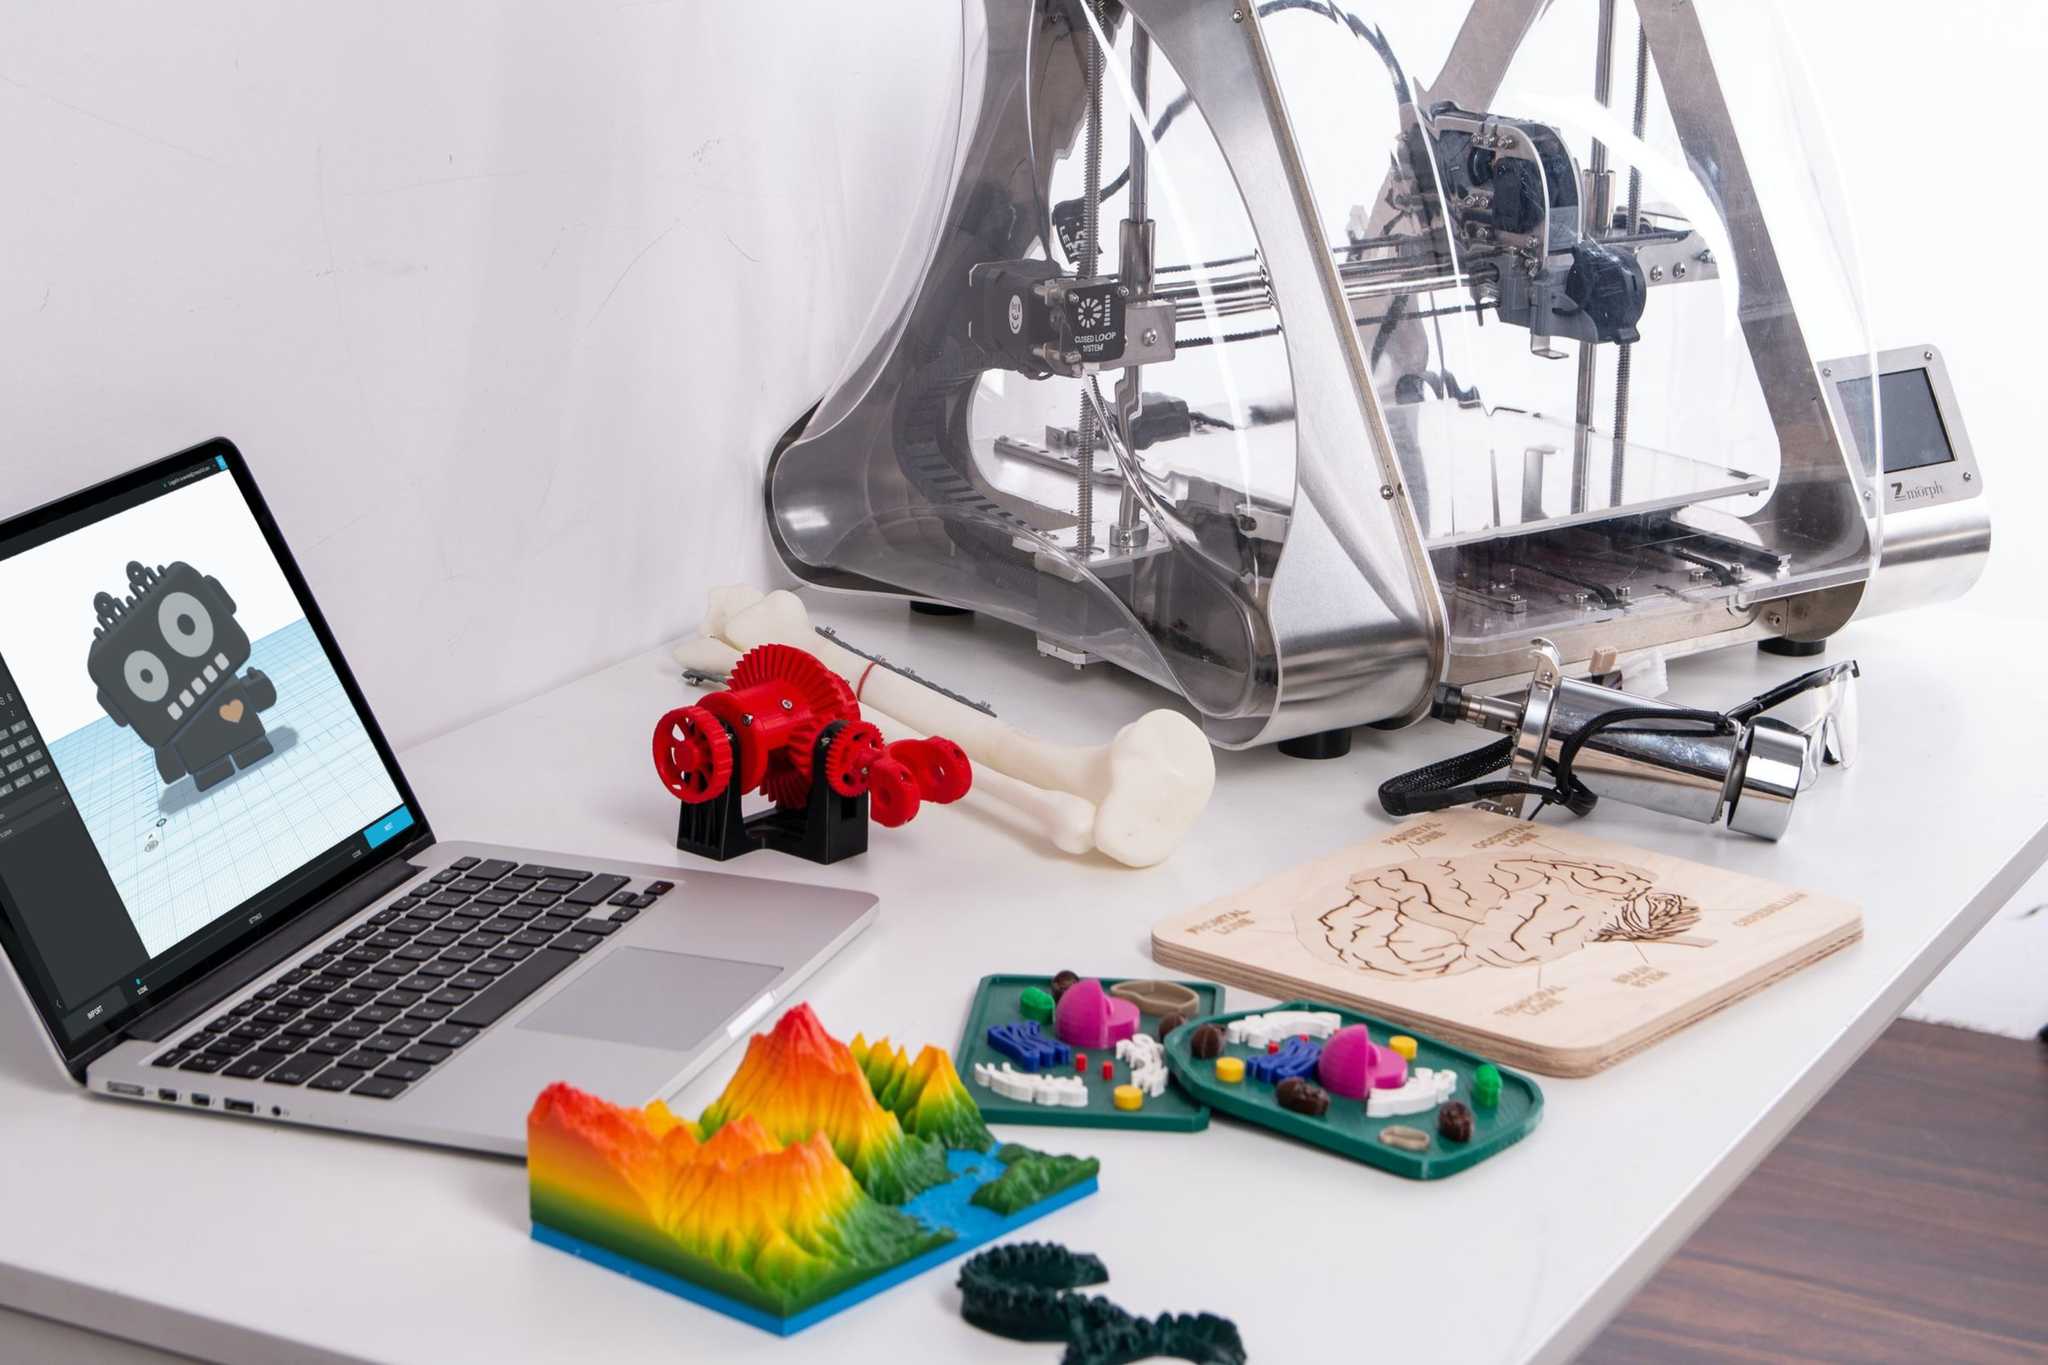 Laptop, 3d printer and a number of 3d printed colourful models on a desk